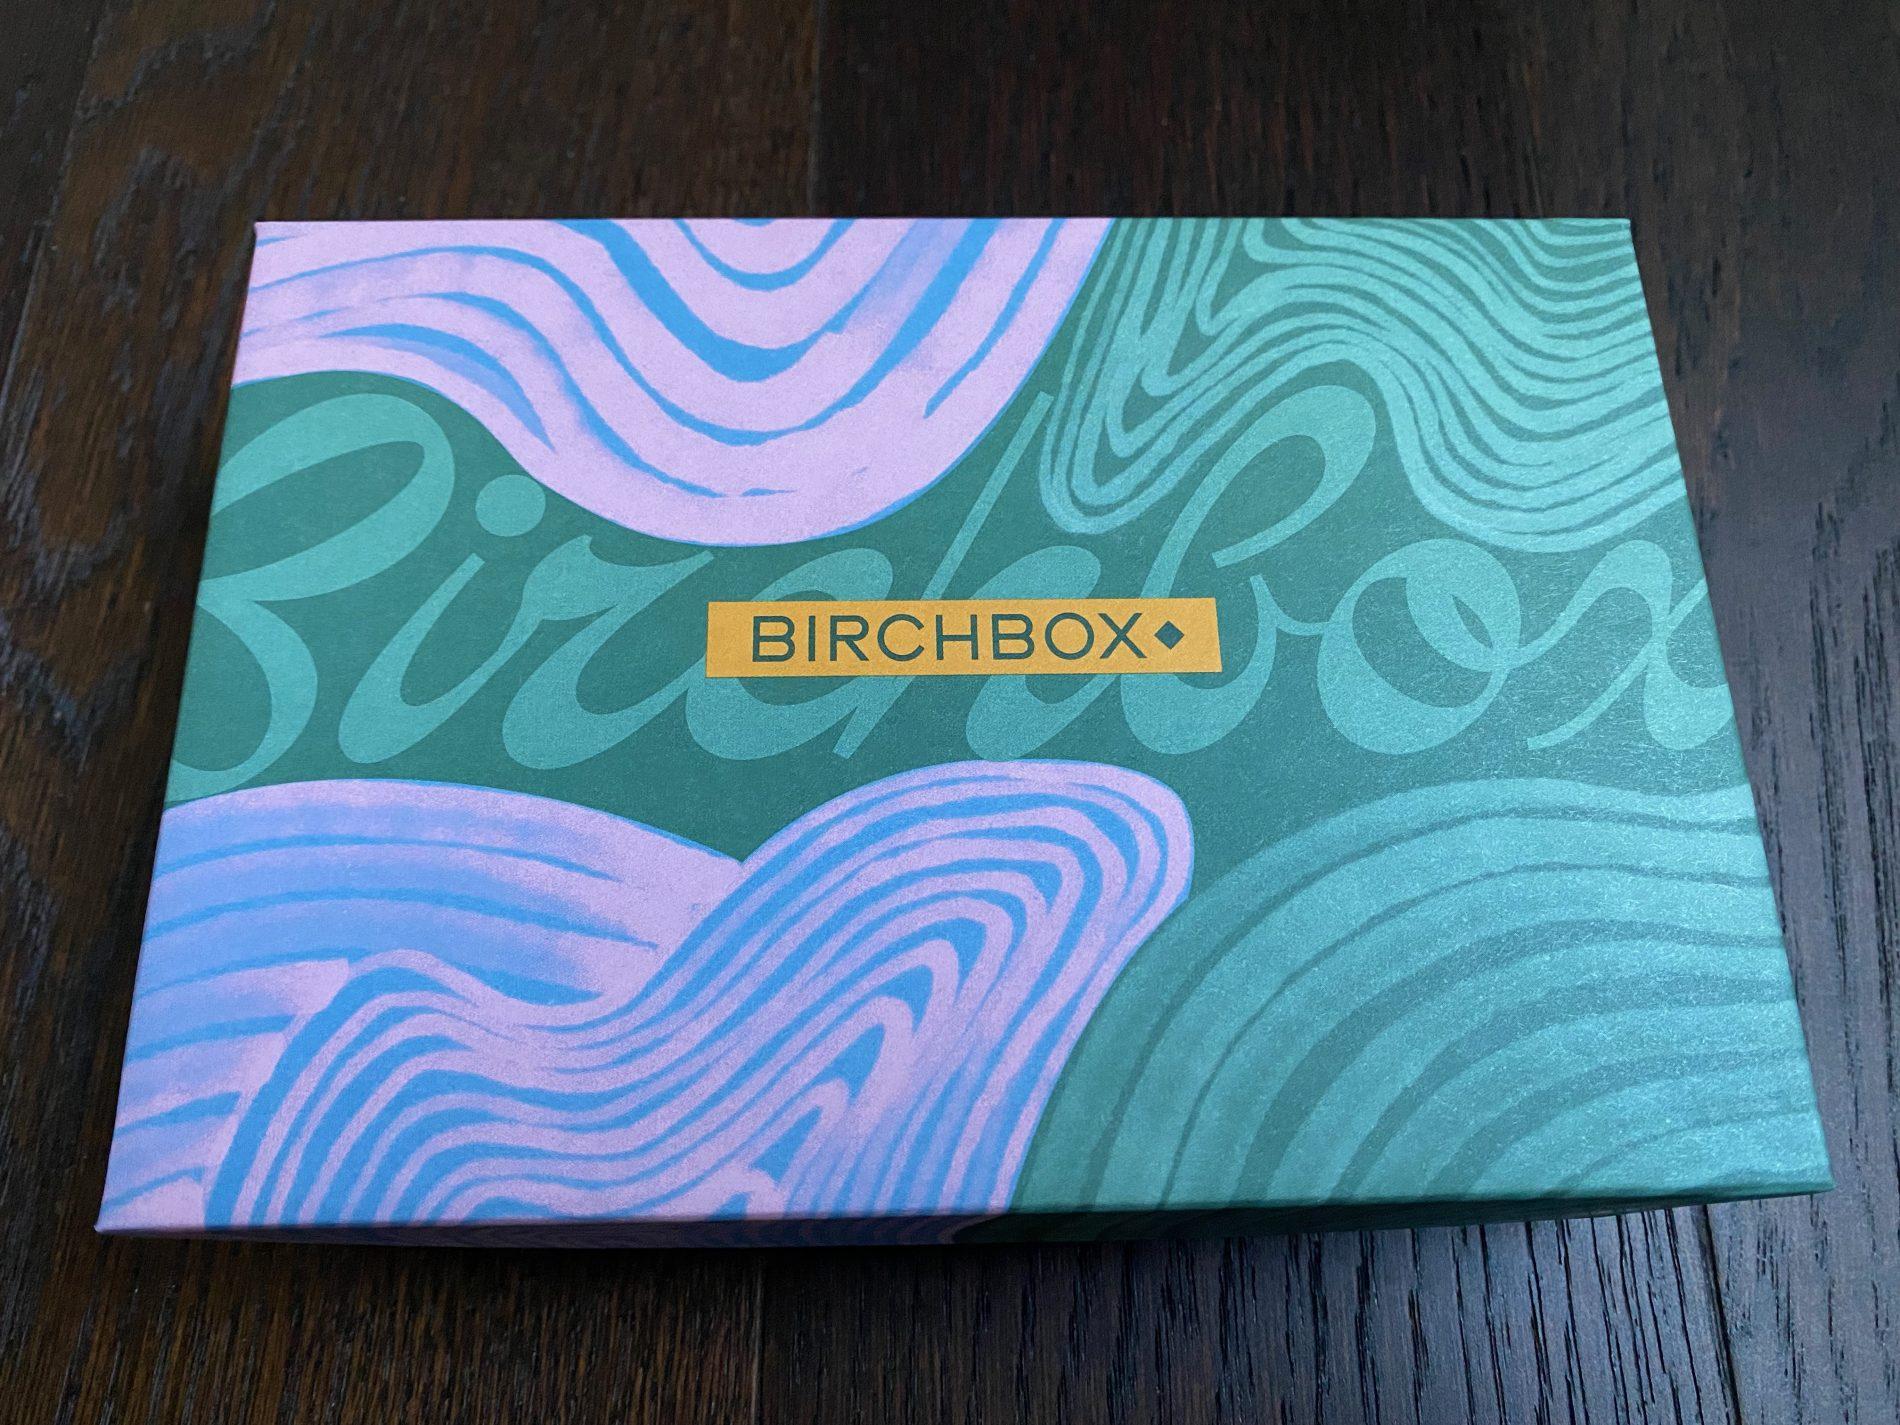 Birchbox has been Acquired by Femtec